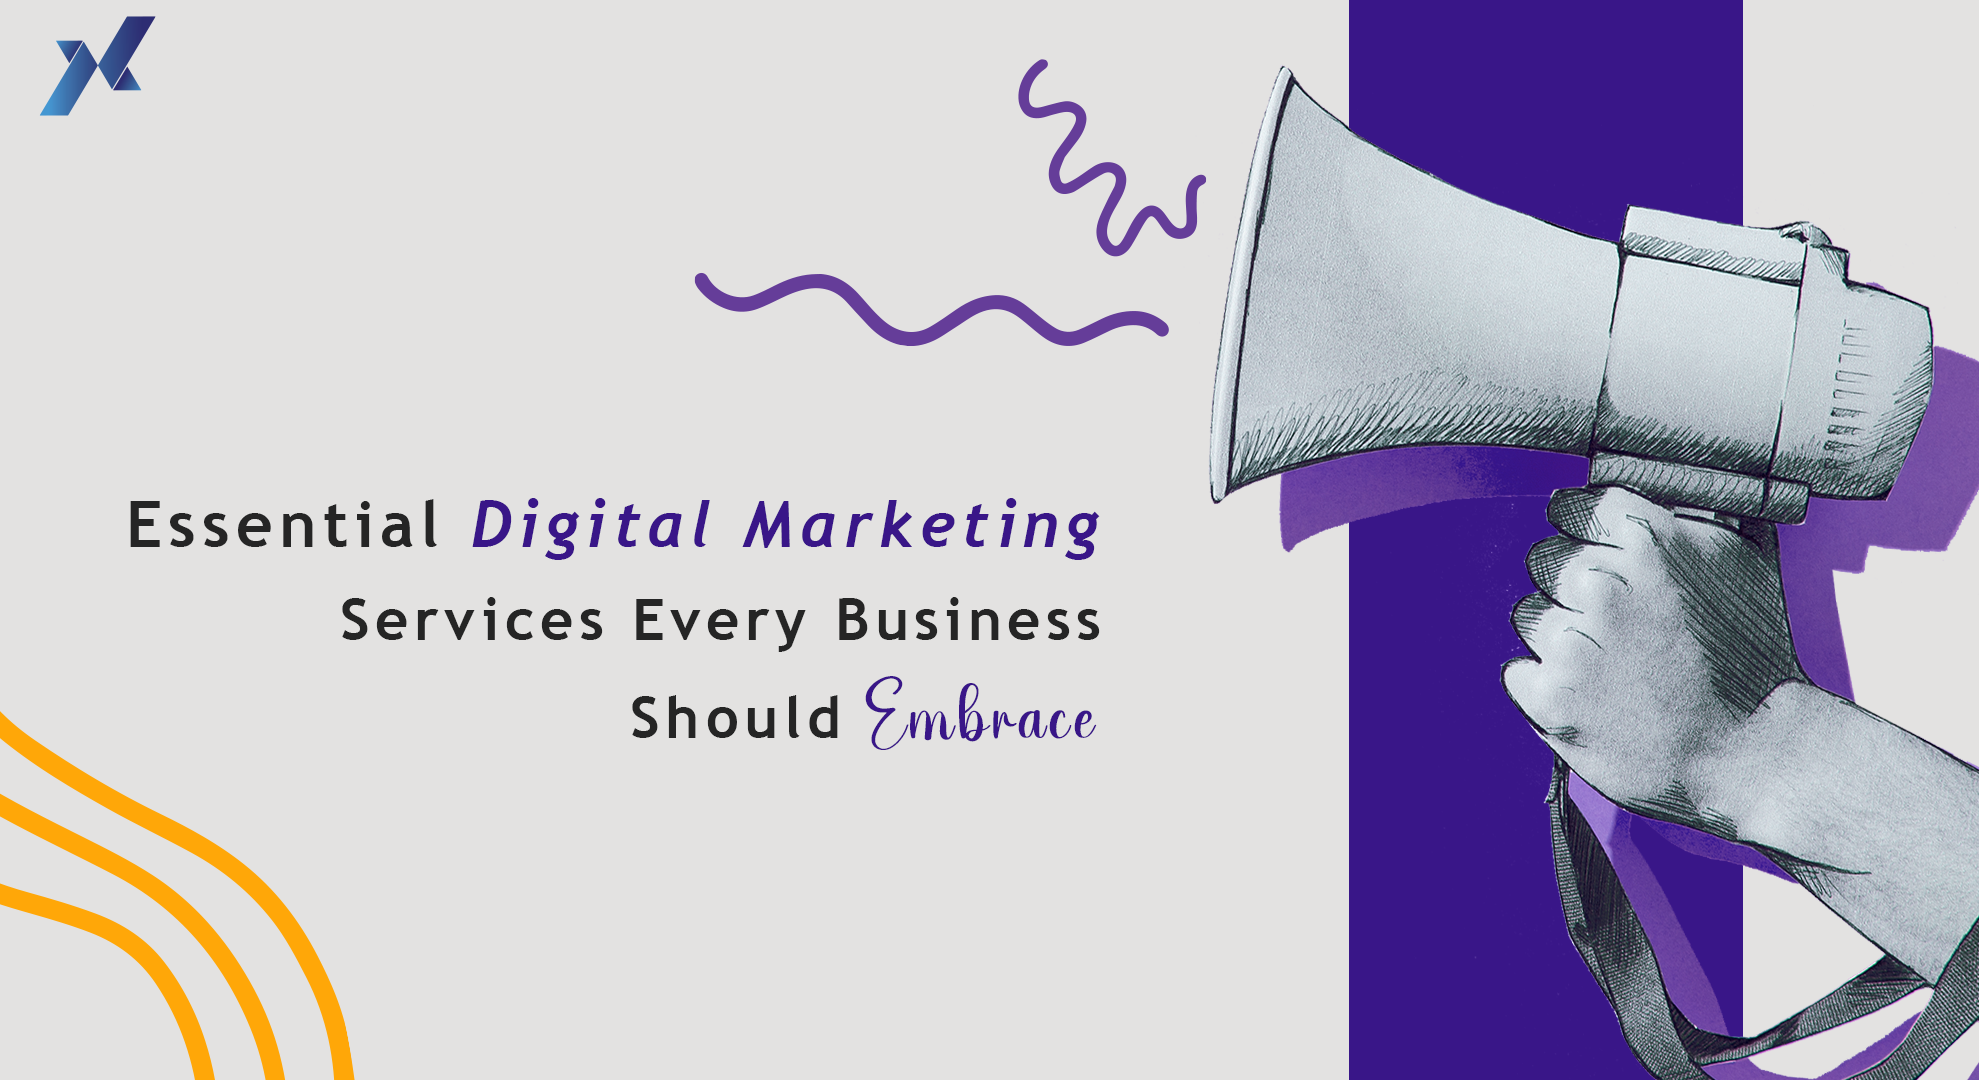 Essential Digital Marketing Services Every Business Should Embrace